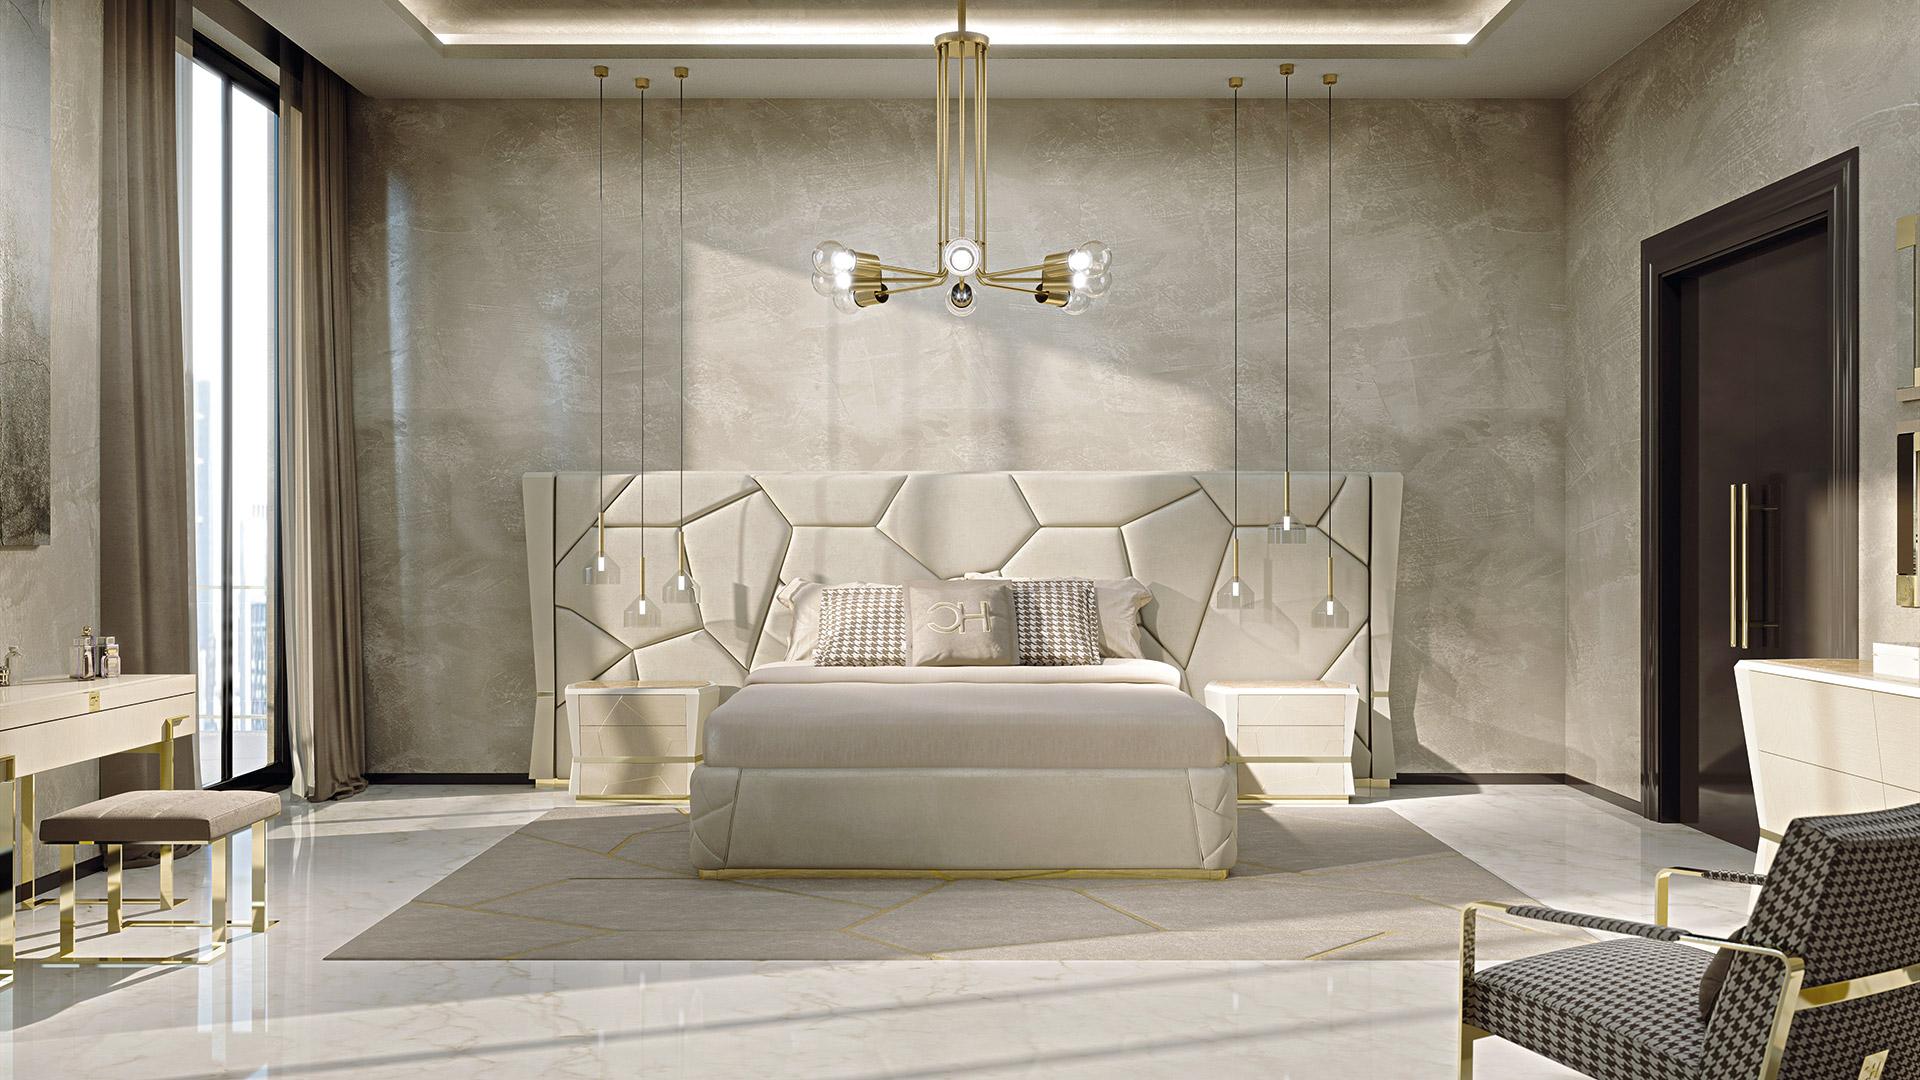 Big padded bed. Mattress measures 180 x 200cm. Characterized by beautiful wooden diamond shaped columns on the sides with a central Golden galvanic metal strip. The headboard is completed by amazing irregular stitchings that resembles the entire